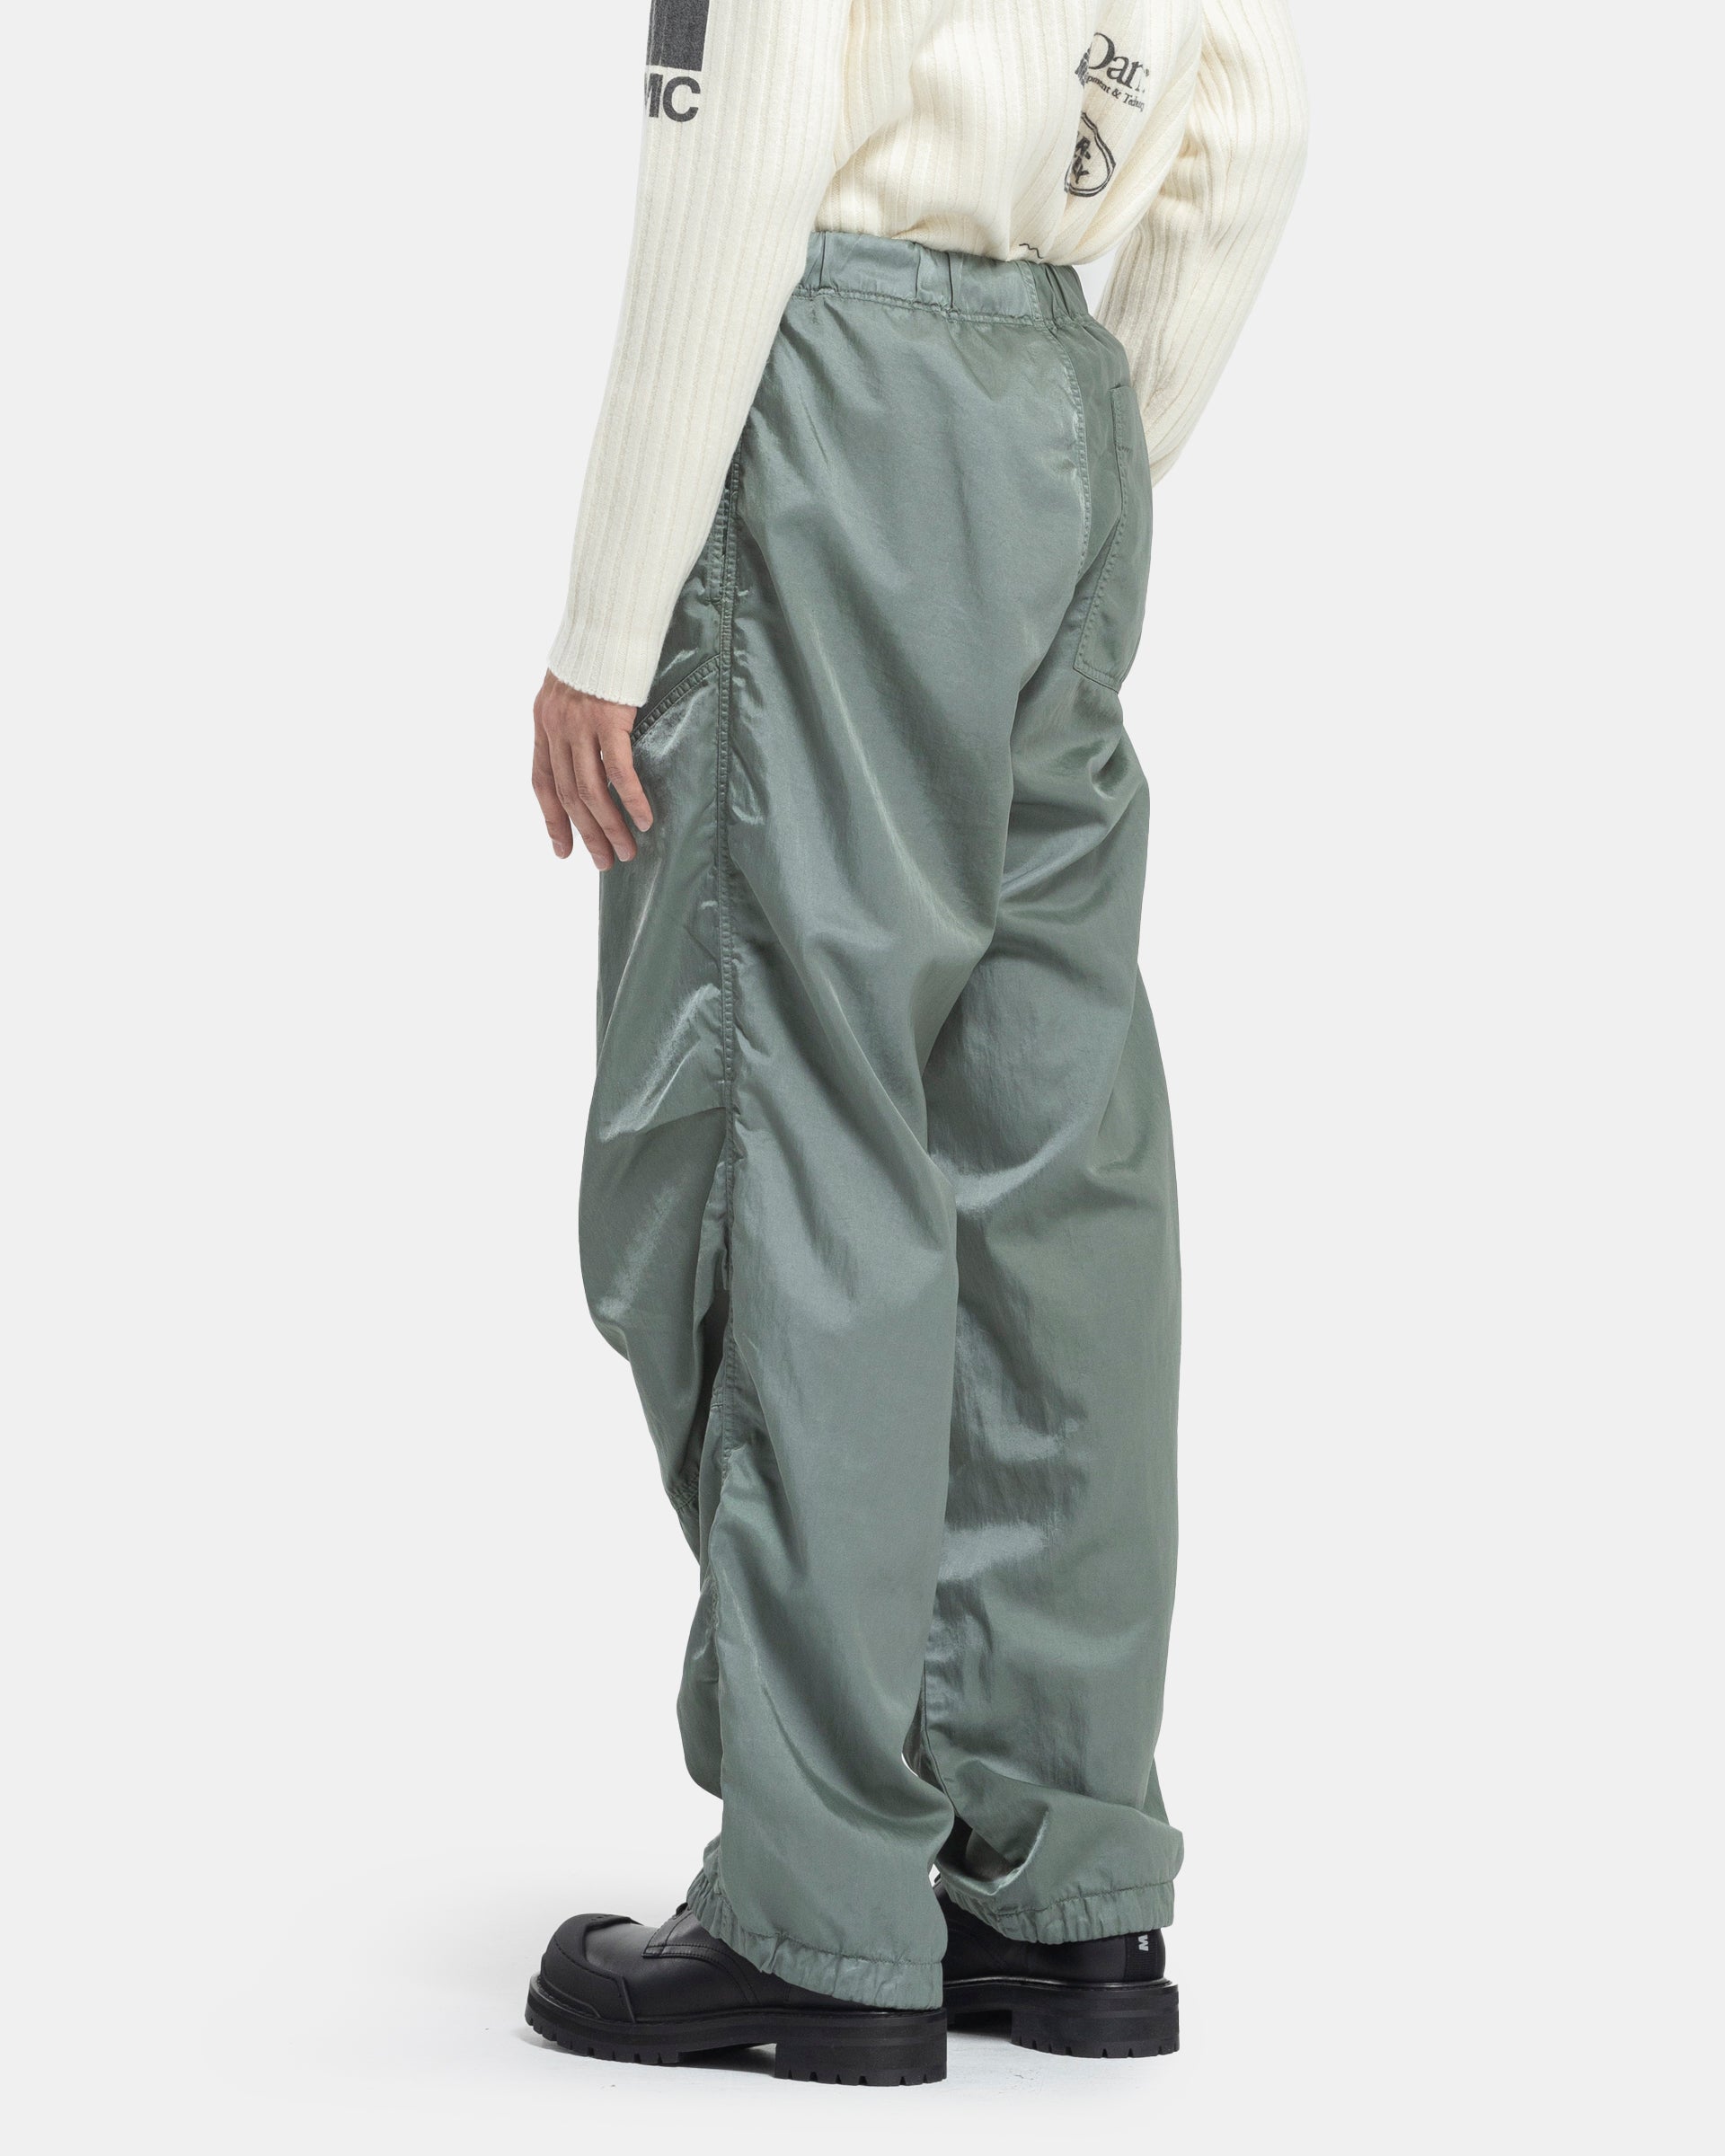 Provo Pants in Hedge Green